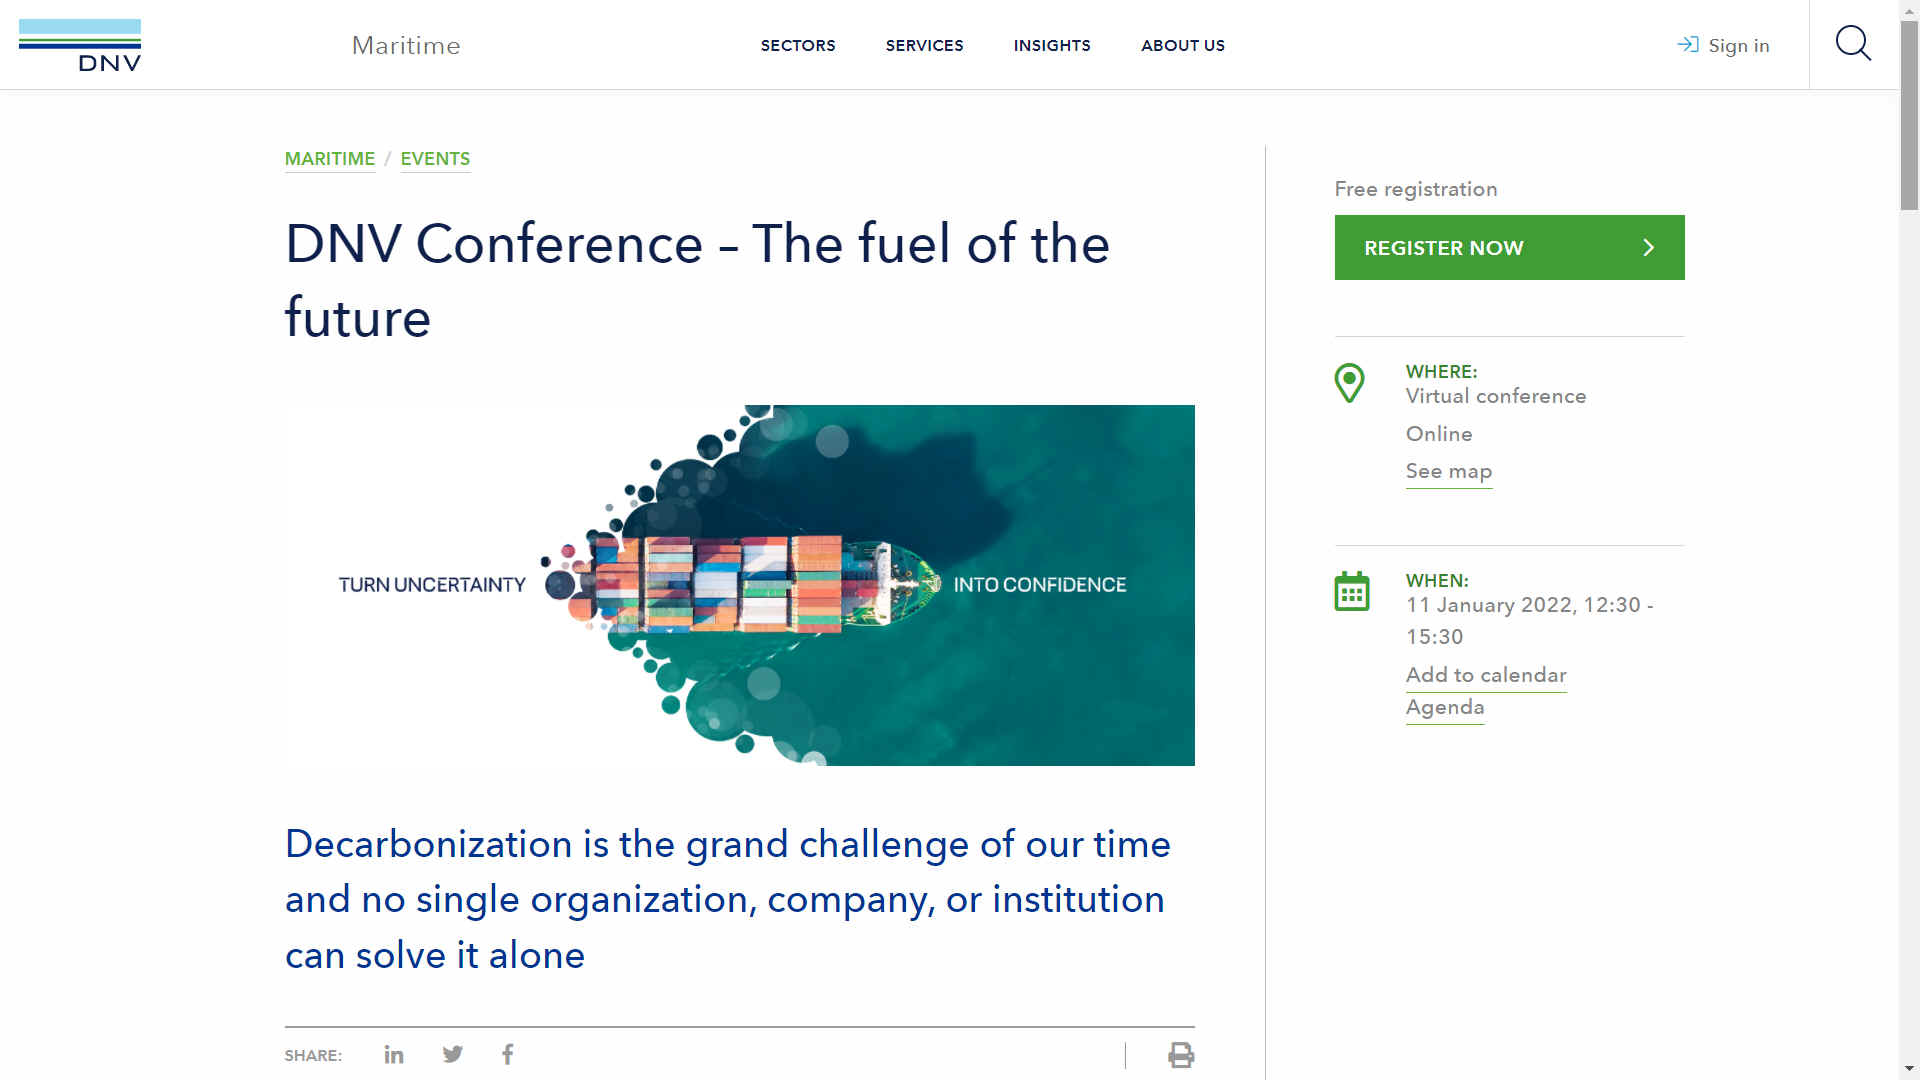 DNV Fuel of the Future online conference 11 January 2022